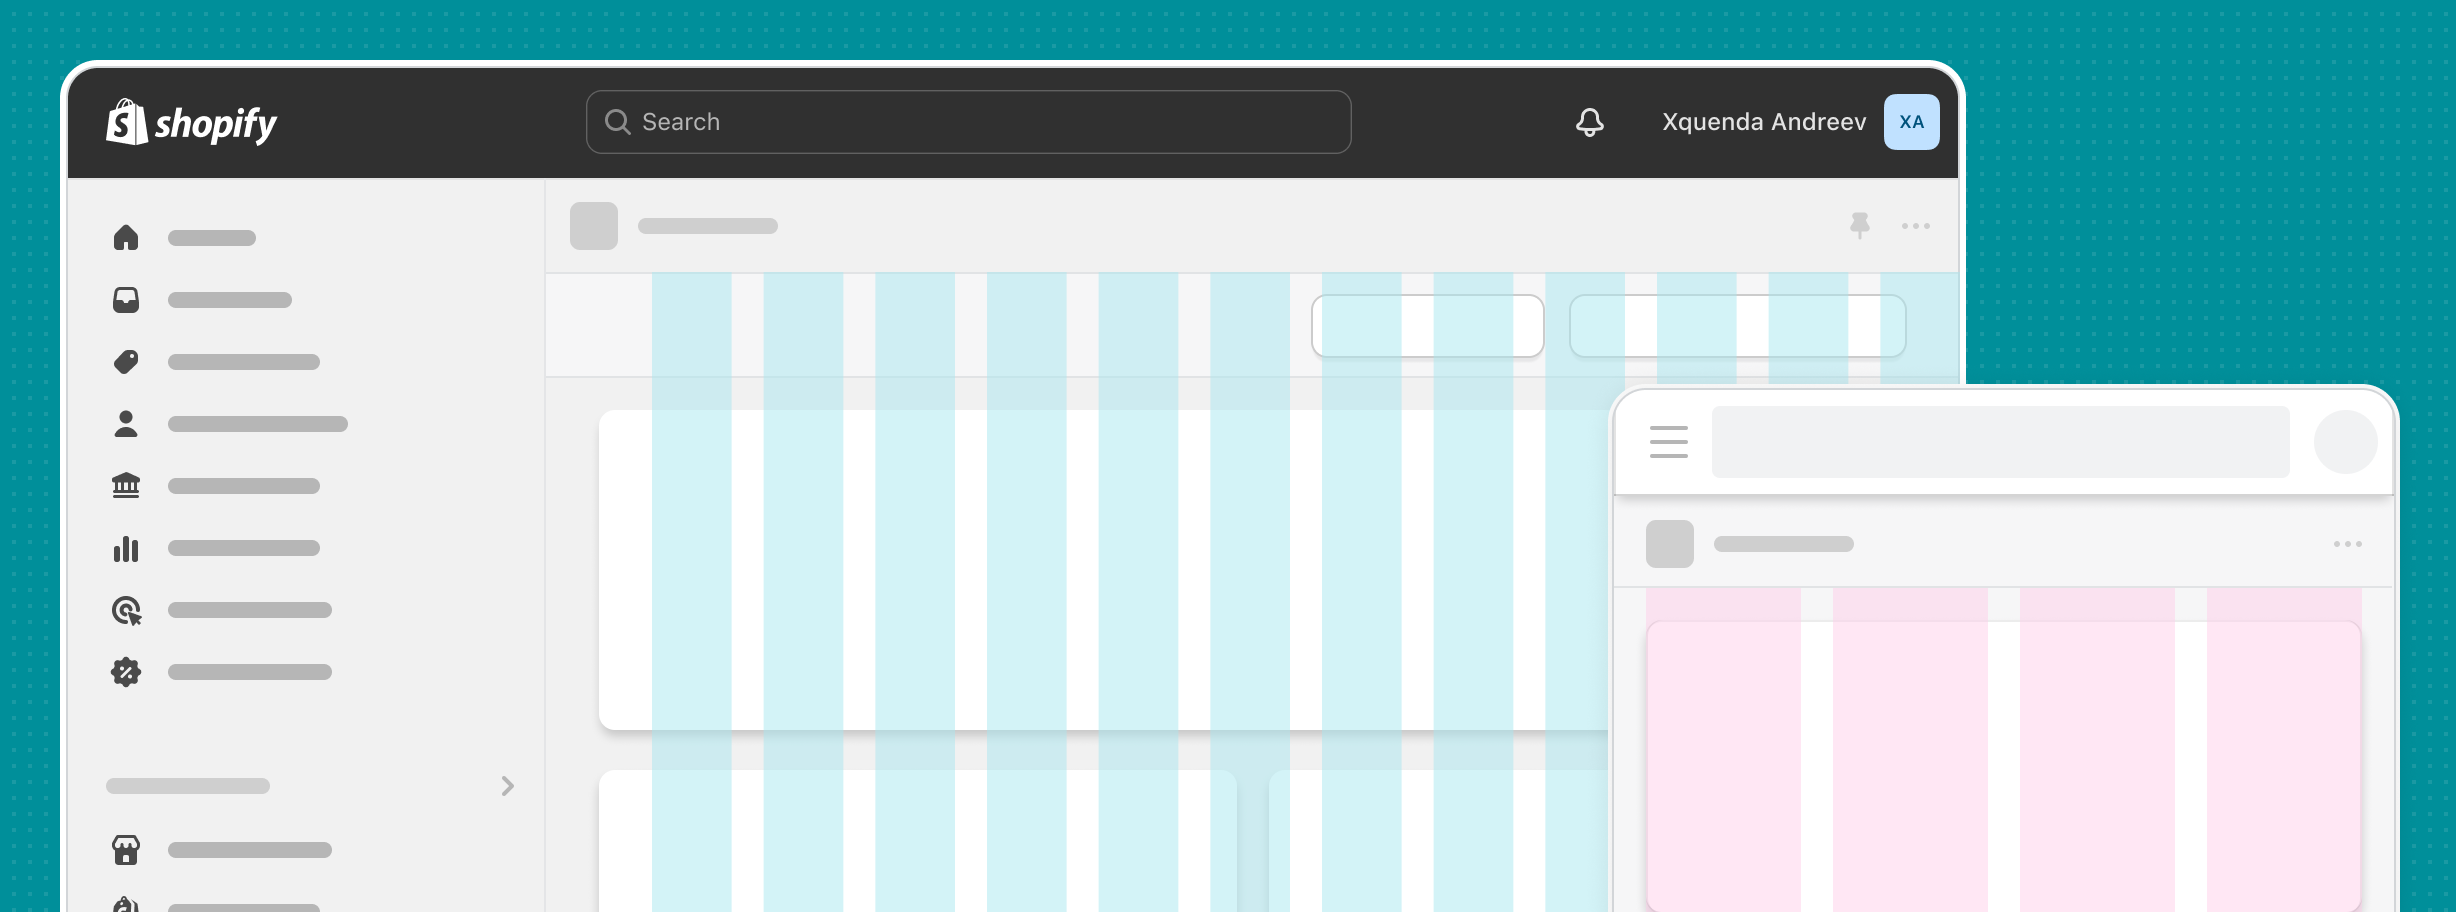 image of the responsive layout grid